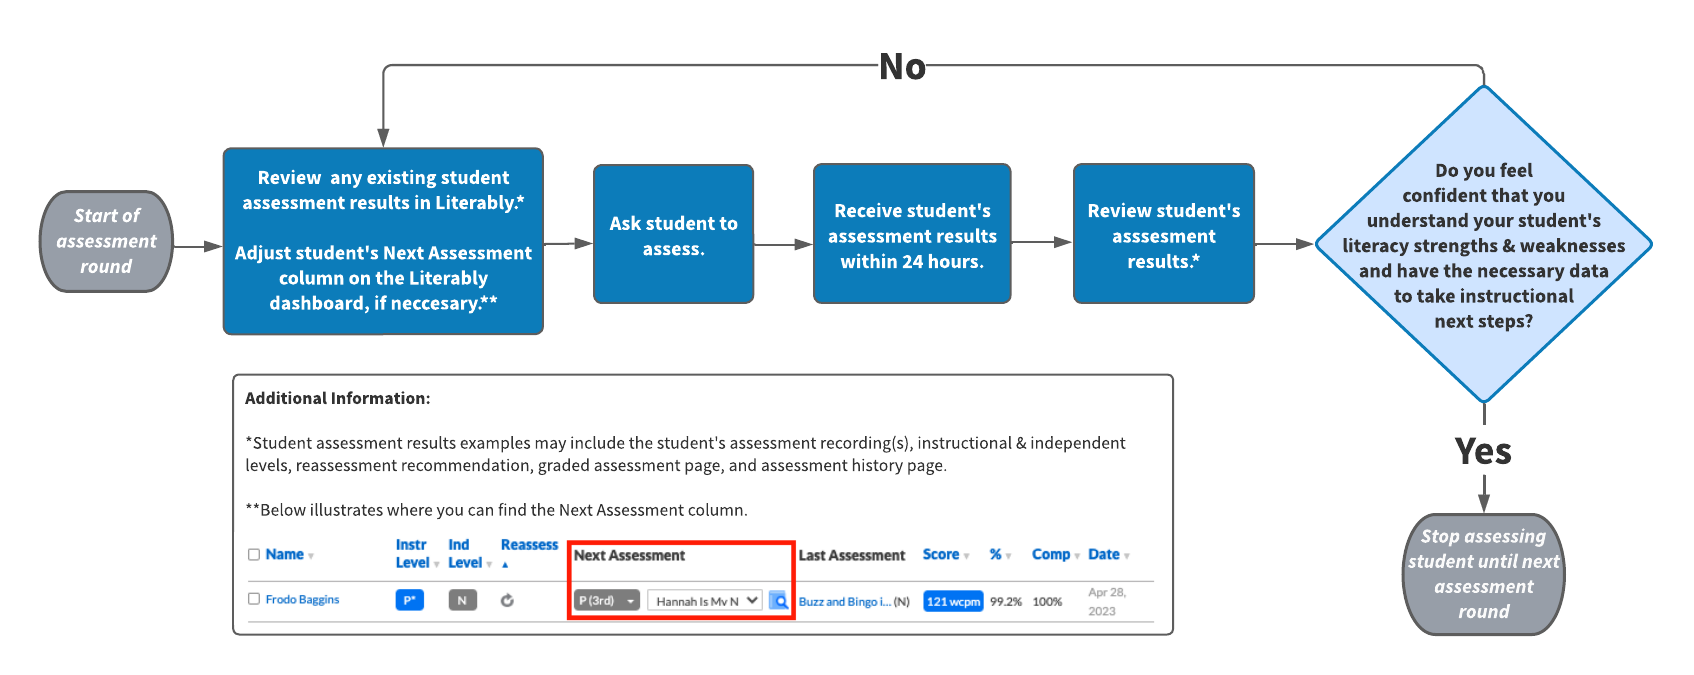 Reassessment_flowchart_with_NA_screenshot__4_.png